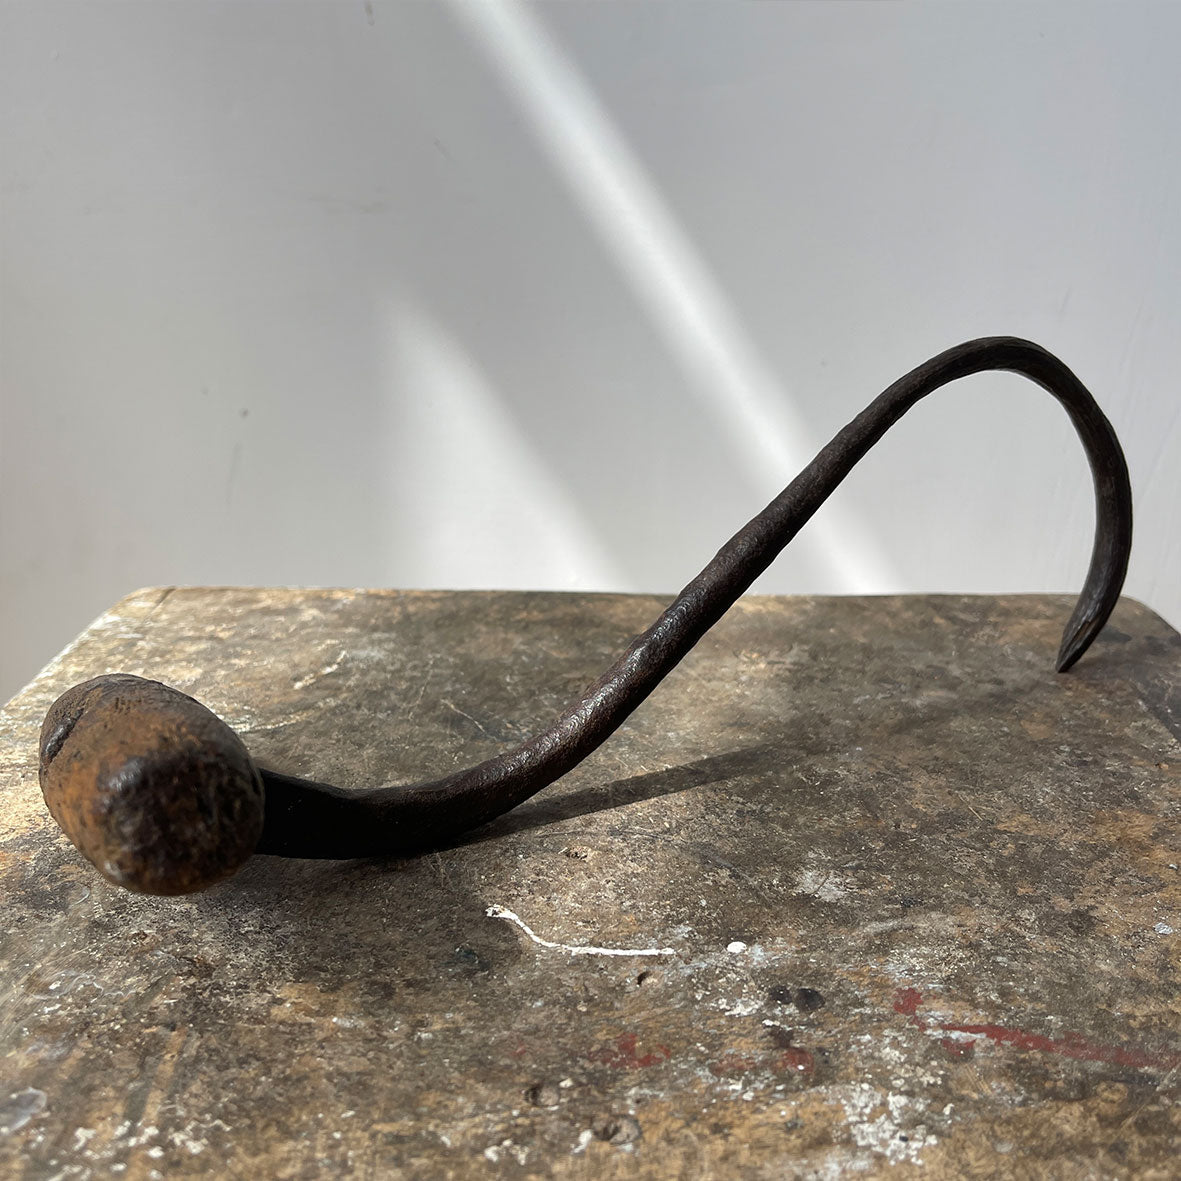 A Victorian Sack Hook with a beautifully aged handle and solid spiked hook. Very tactile in the hand. - SHOP NOW - www.intovintage.co.uk